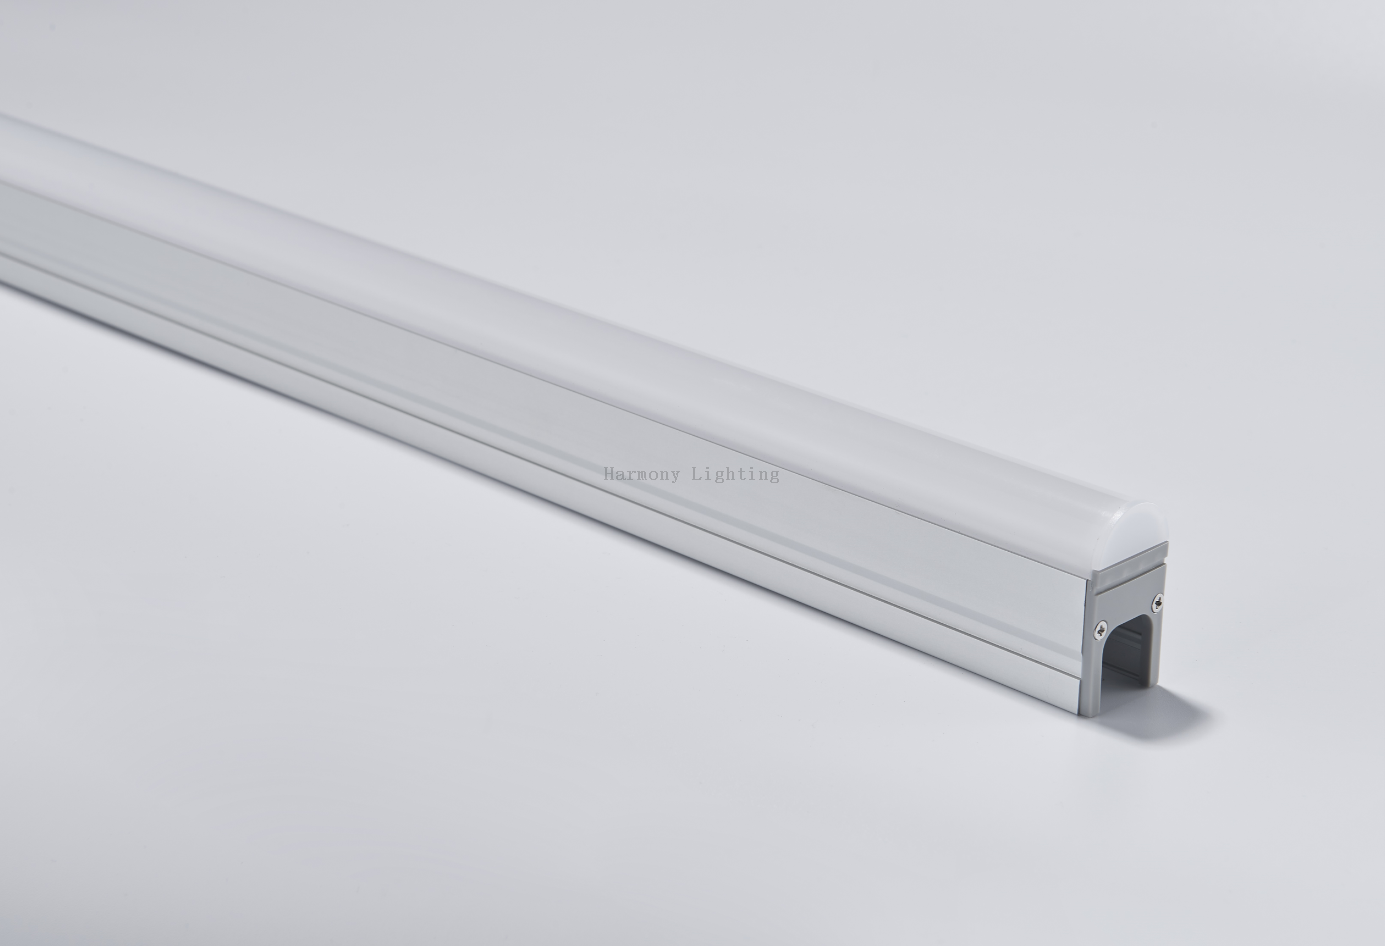 RH-C25 12W New design of waterproof aluminum extrusion with led strip for both indoor and outdoor linear light led applications